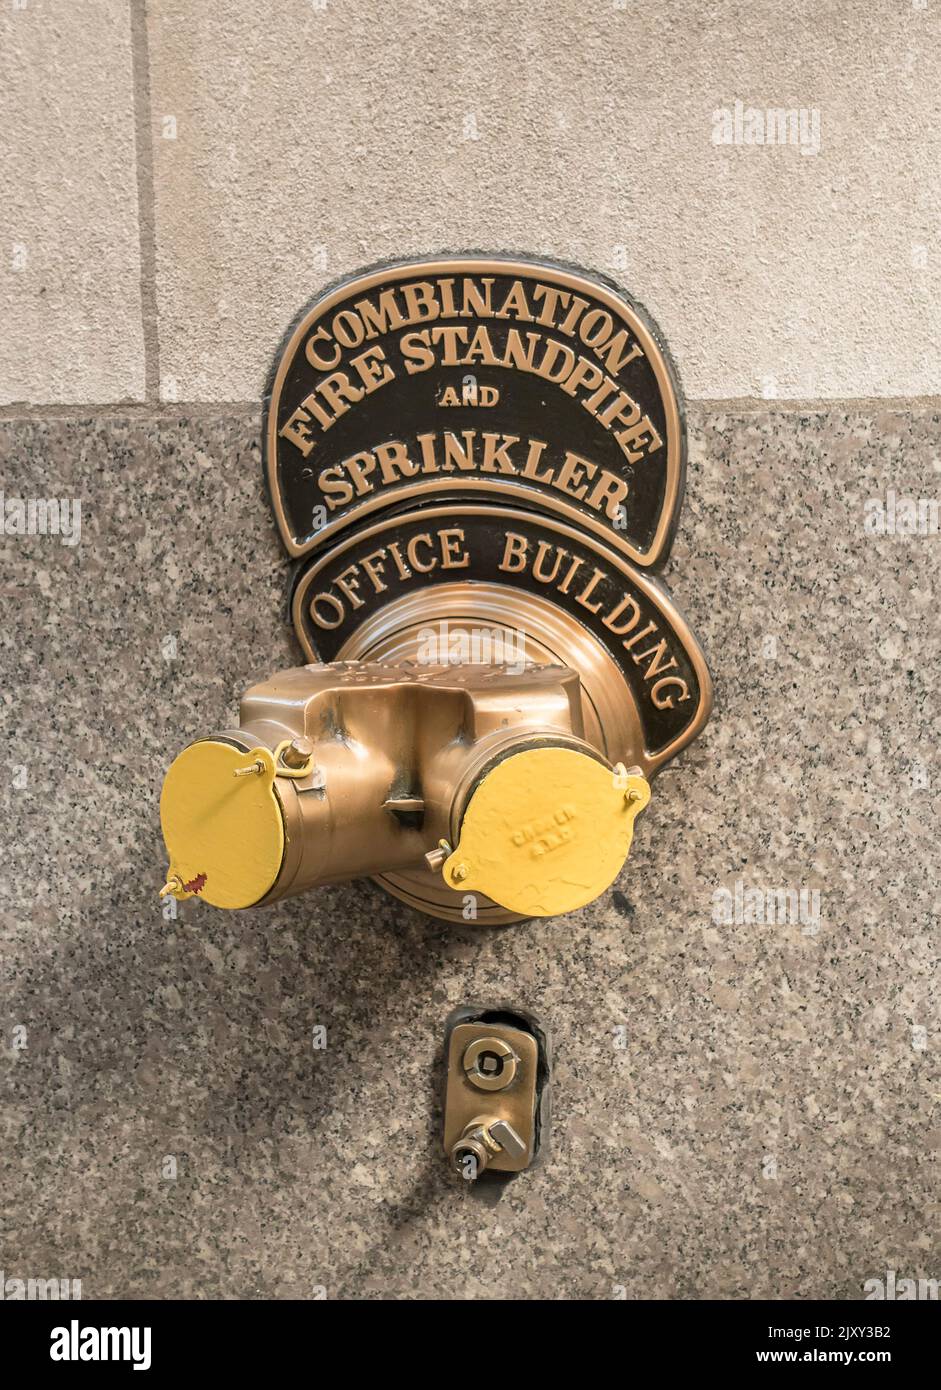 Combination Fire stand and sprinkler outside bulding in Nwe York, USA Stock Photo